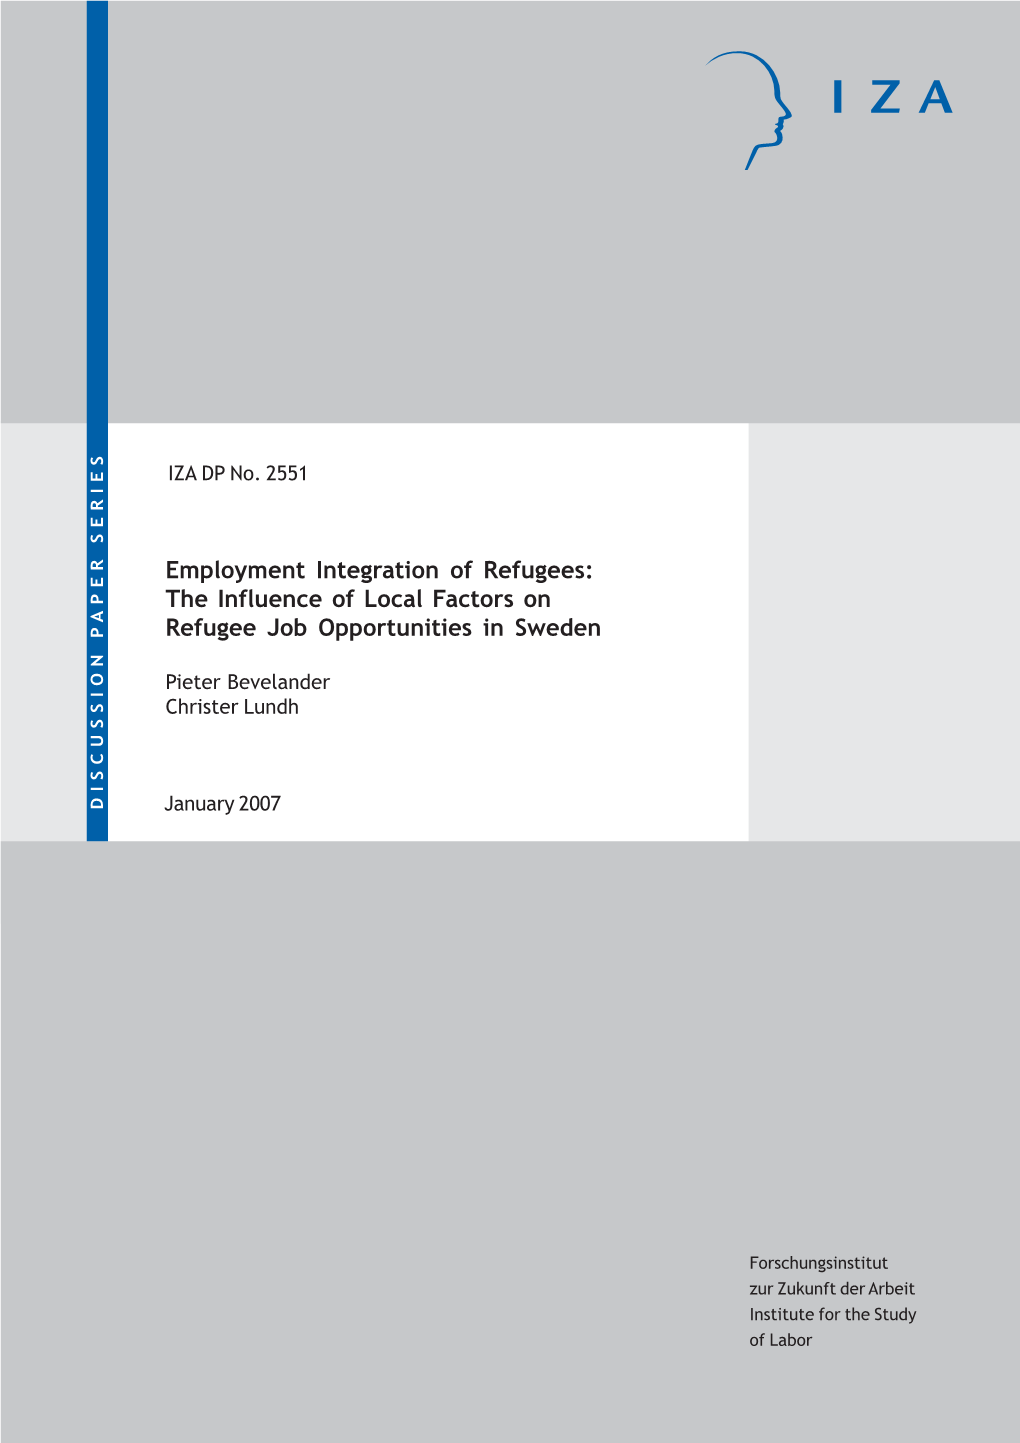 Employment Integration of Refugees: the Influence of Local Factors on Refugee Job Opportunities in Sweden